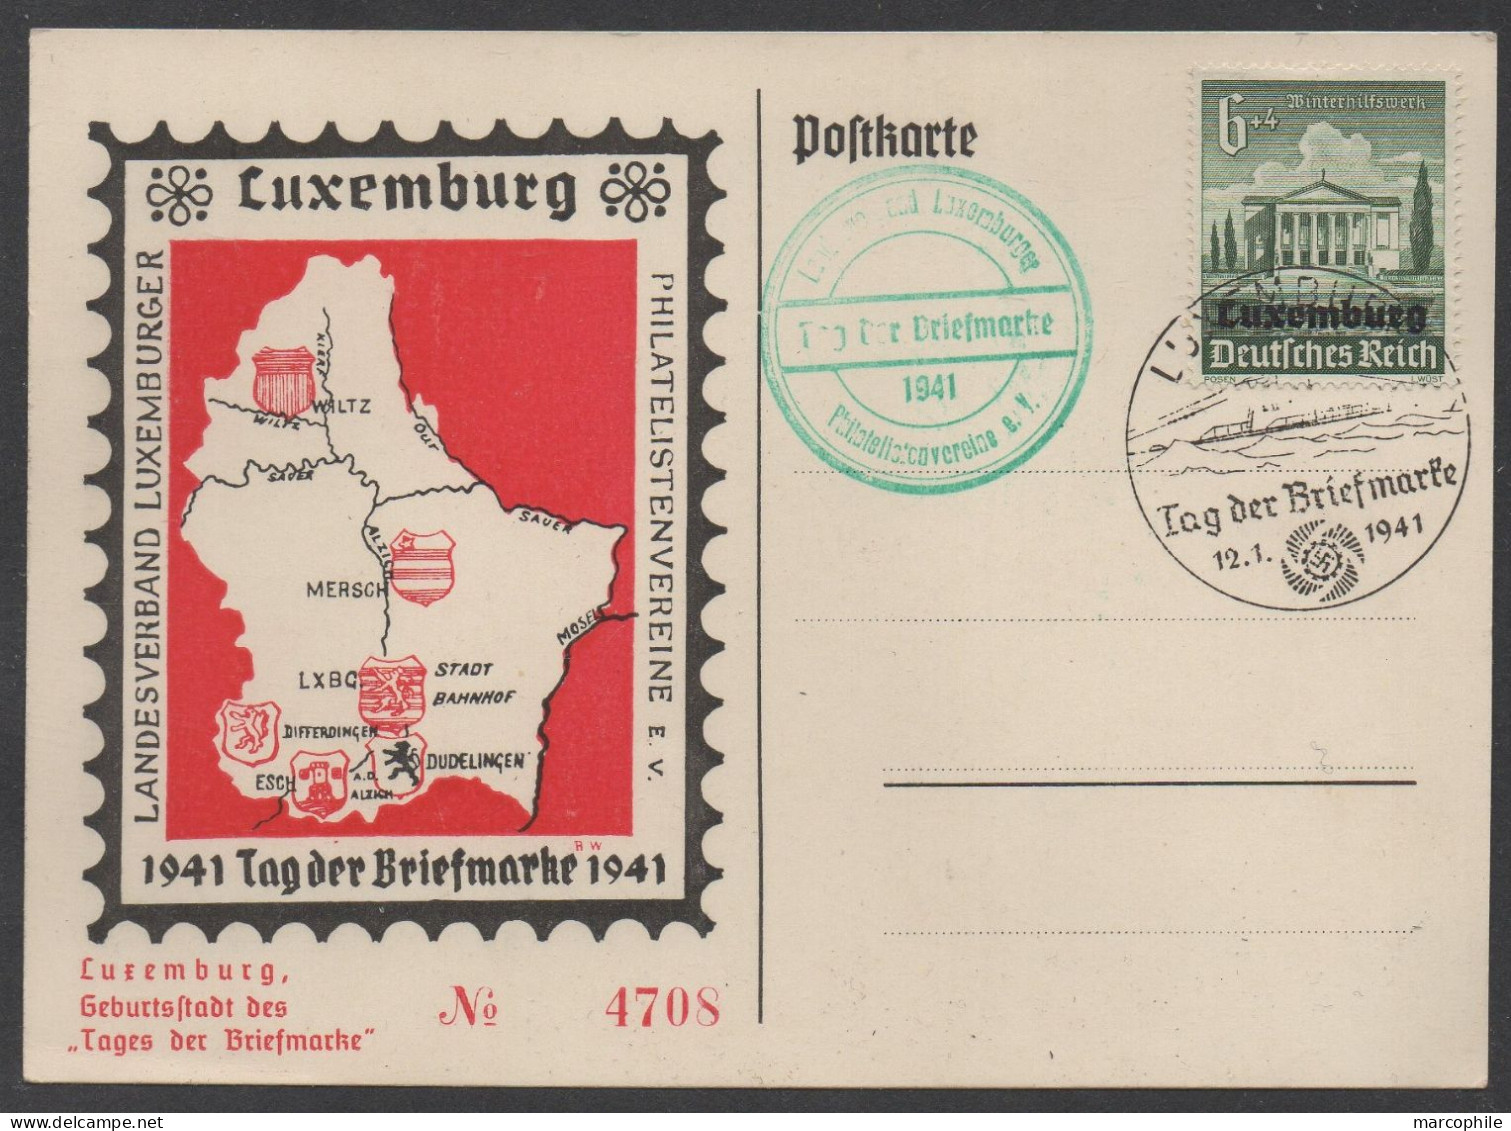 LUXEMBOURG - III REICH / 1941 CARTE POSTALE ILLUSTREE & NUMEROTEE - TIMBRE ALLEMAND SURCHARGE  (ref 6621) - 1940-1944 German Occupation